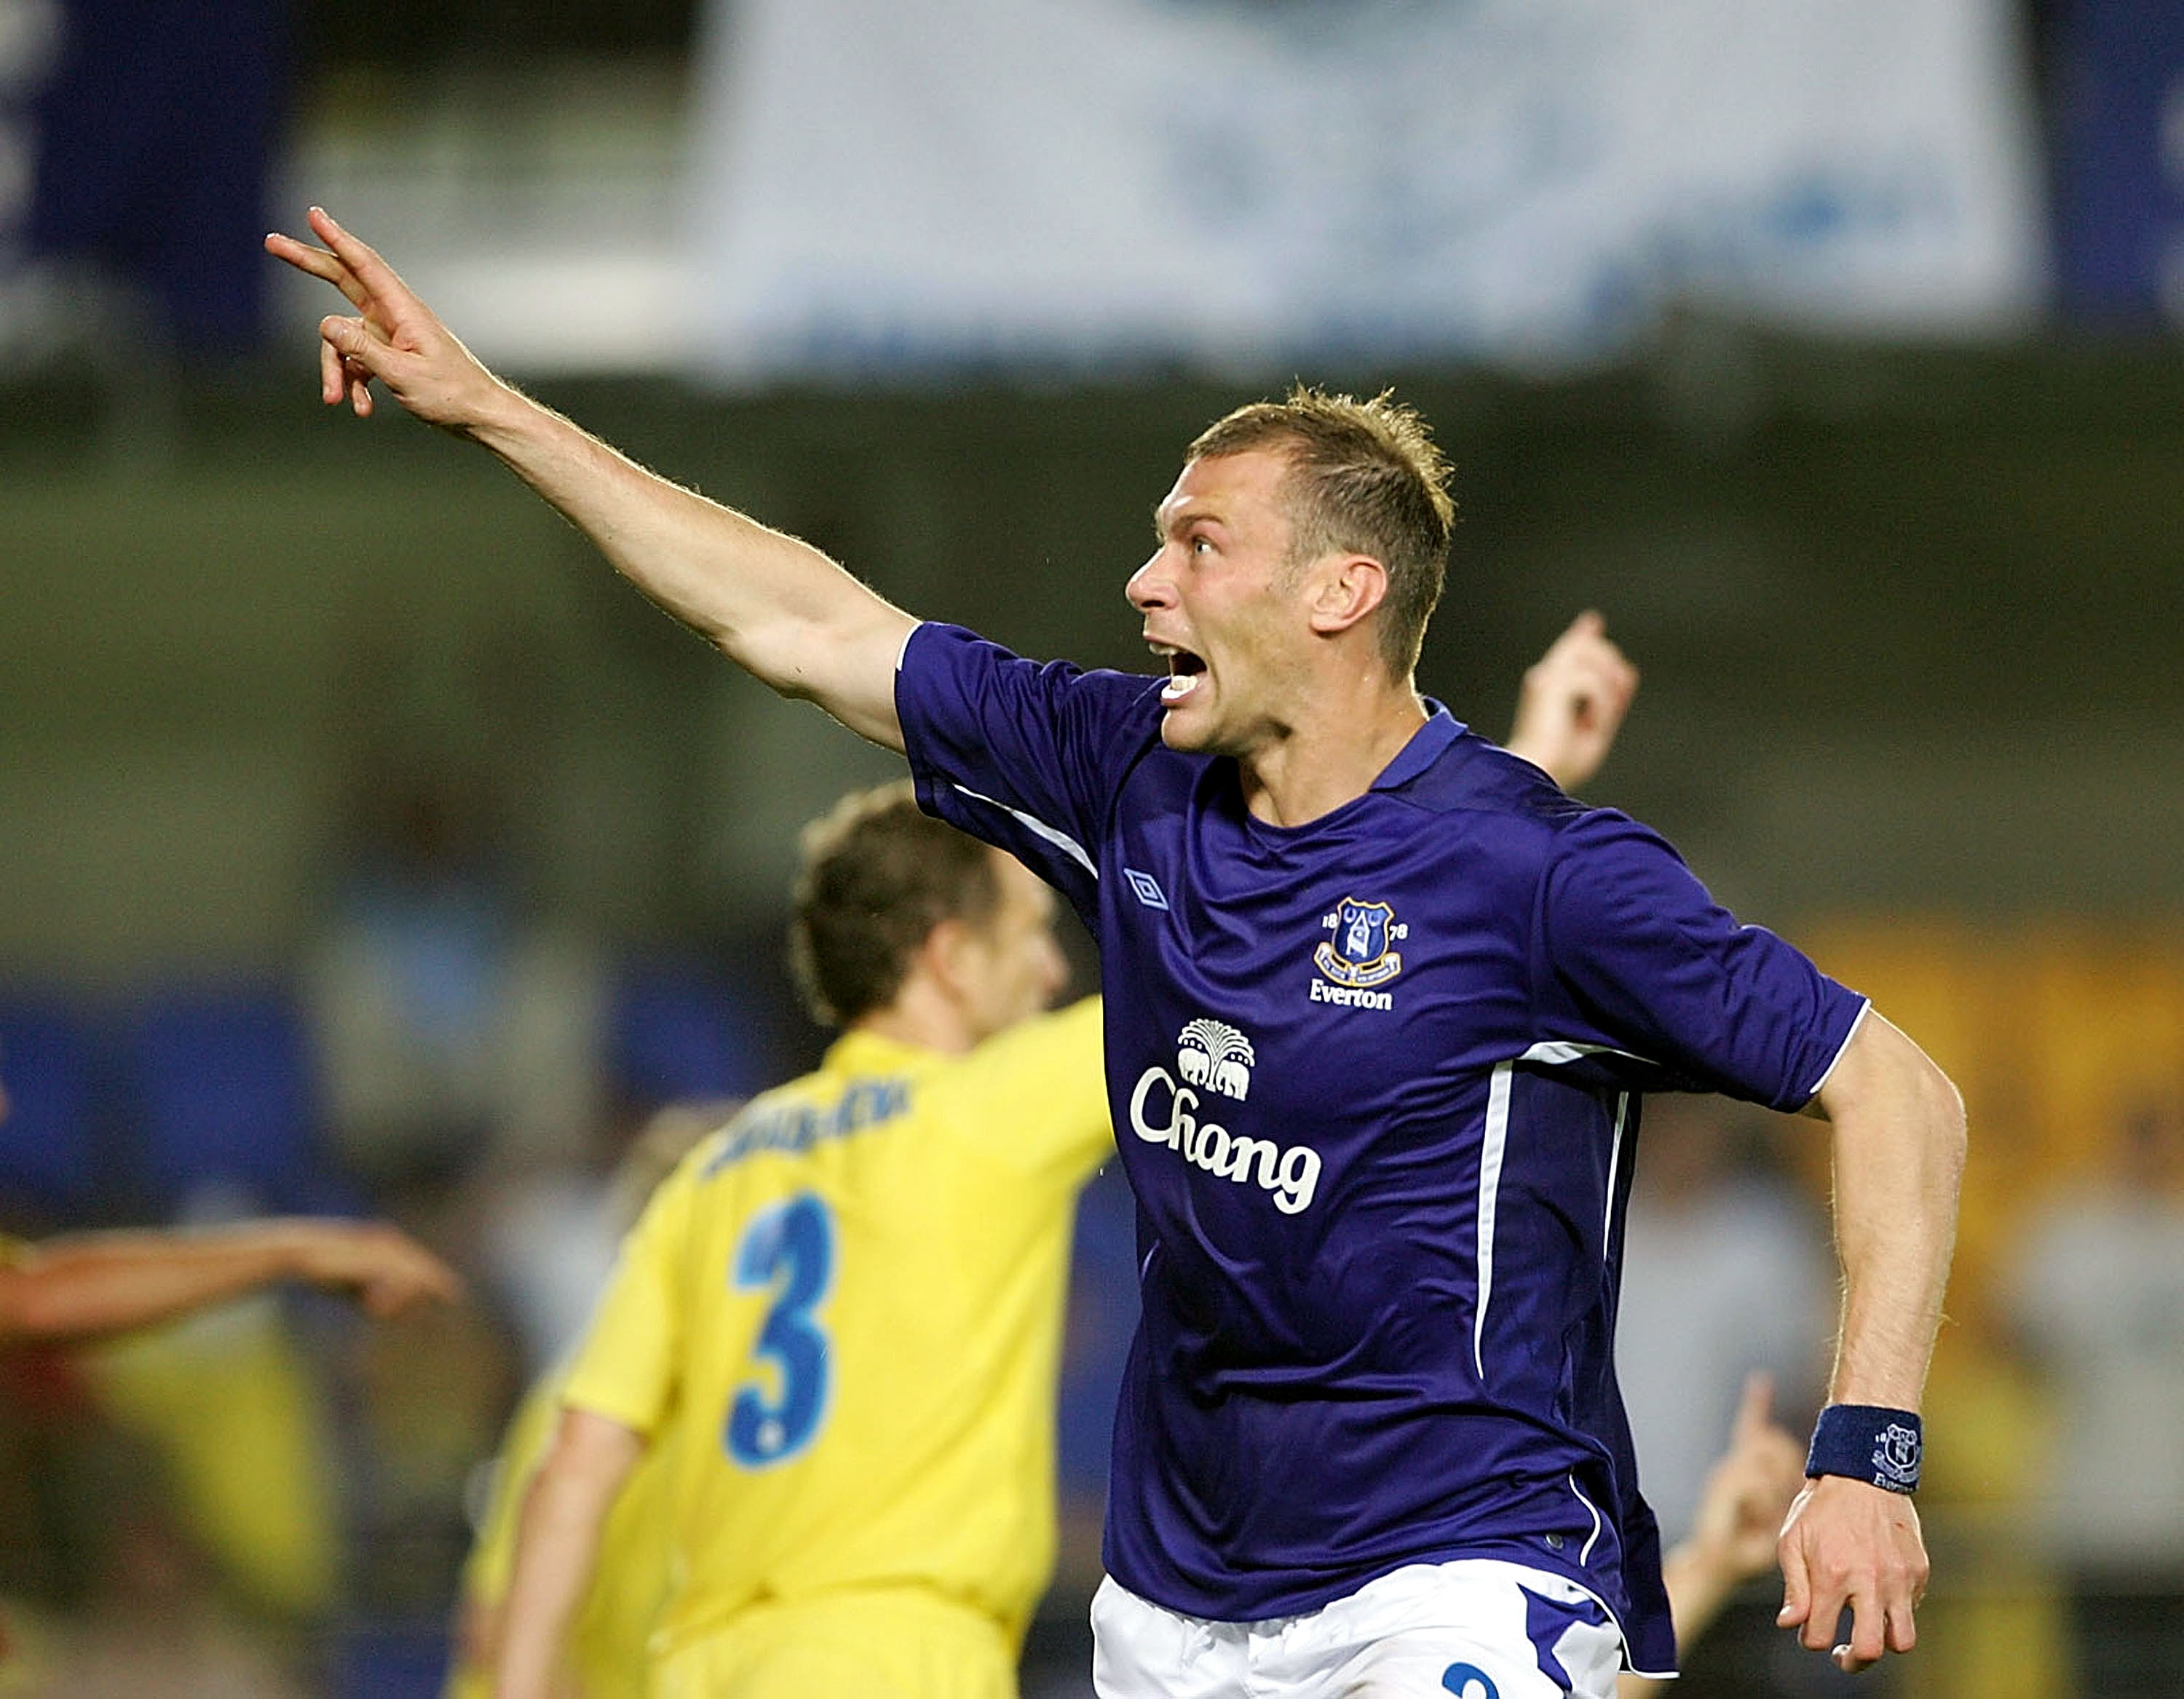 VILLARREAL, SPAIN- AUGUST 24 : Duncan Ferguson of Everton celebrates a goal before it is disallowed during the UEFA Champions League third qualifying round, second leg match between Villarreal and Everton at Madrigal Stadium on August 24, 2005 in Villarre